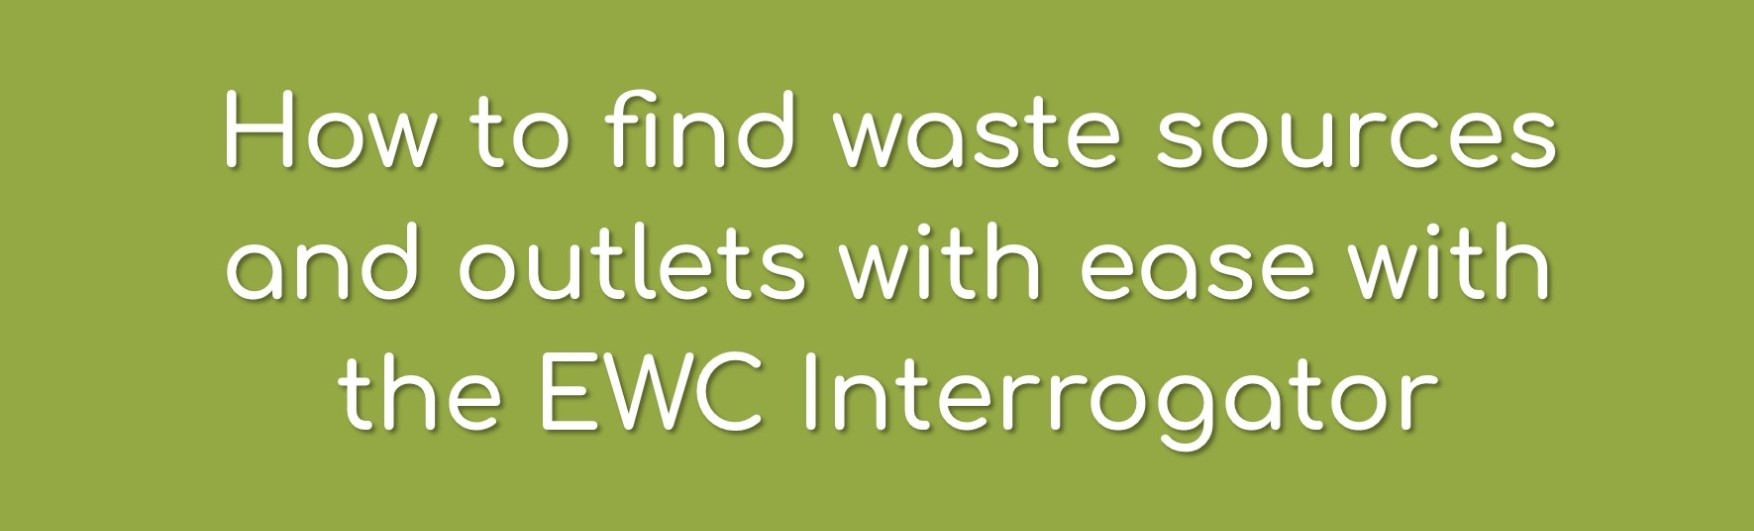 How To Find Waste Sources And Outlets With Ease With The EWC Interrogator